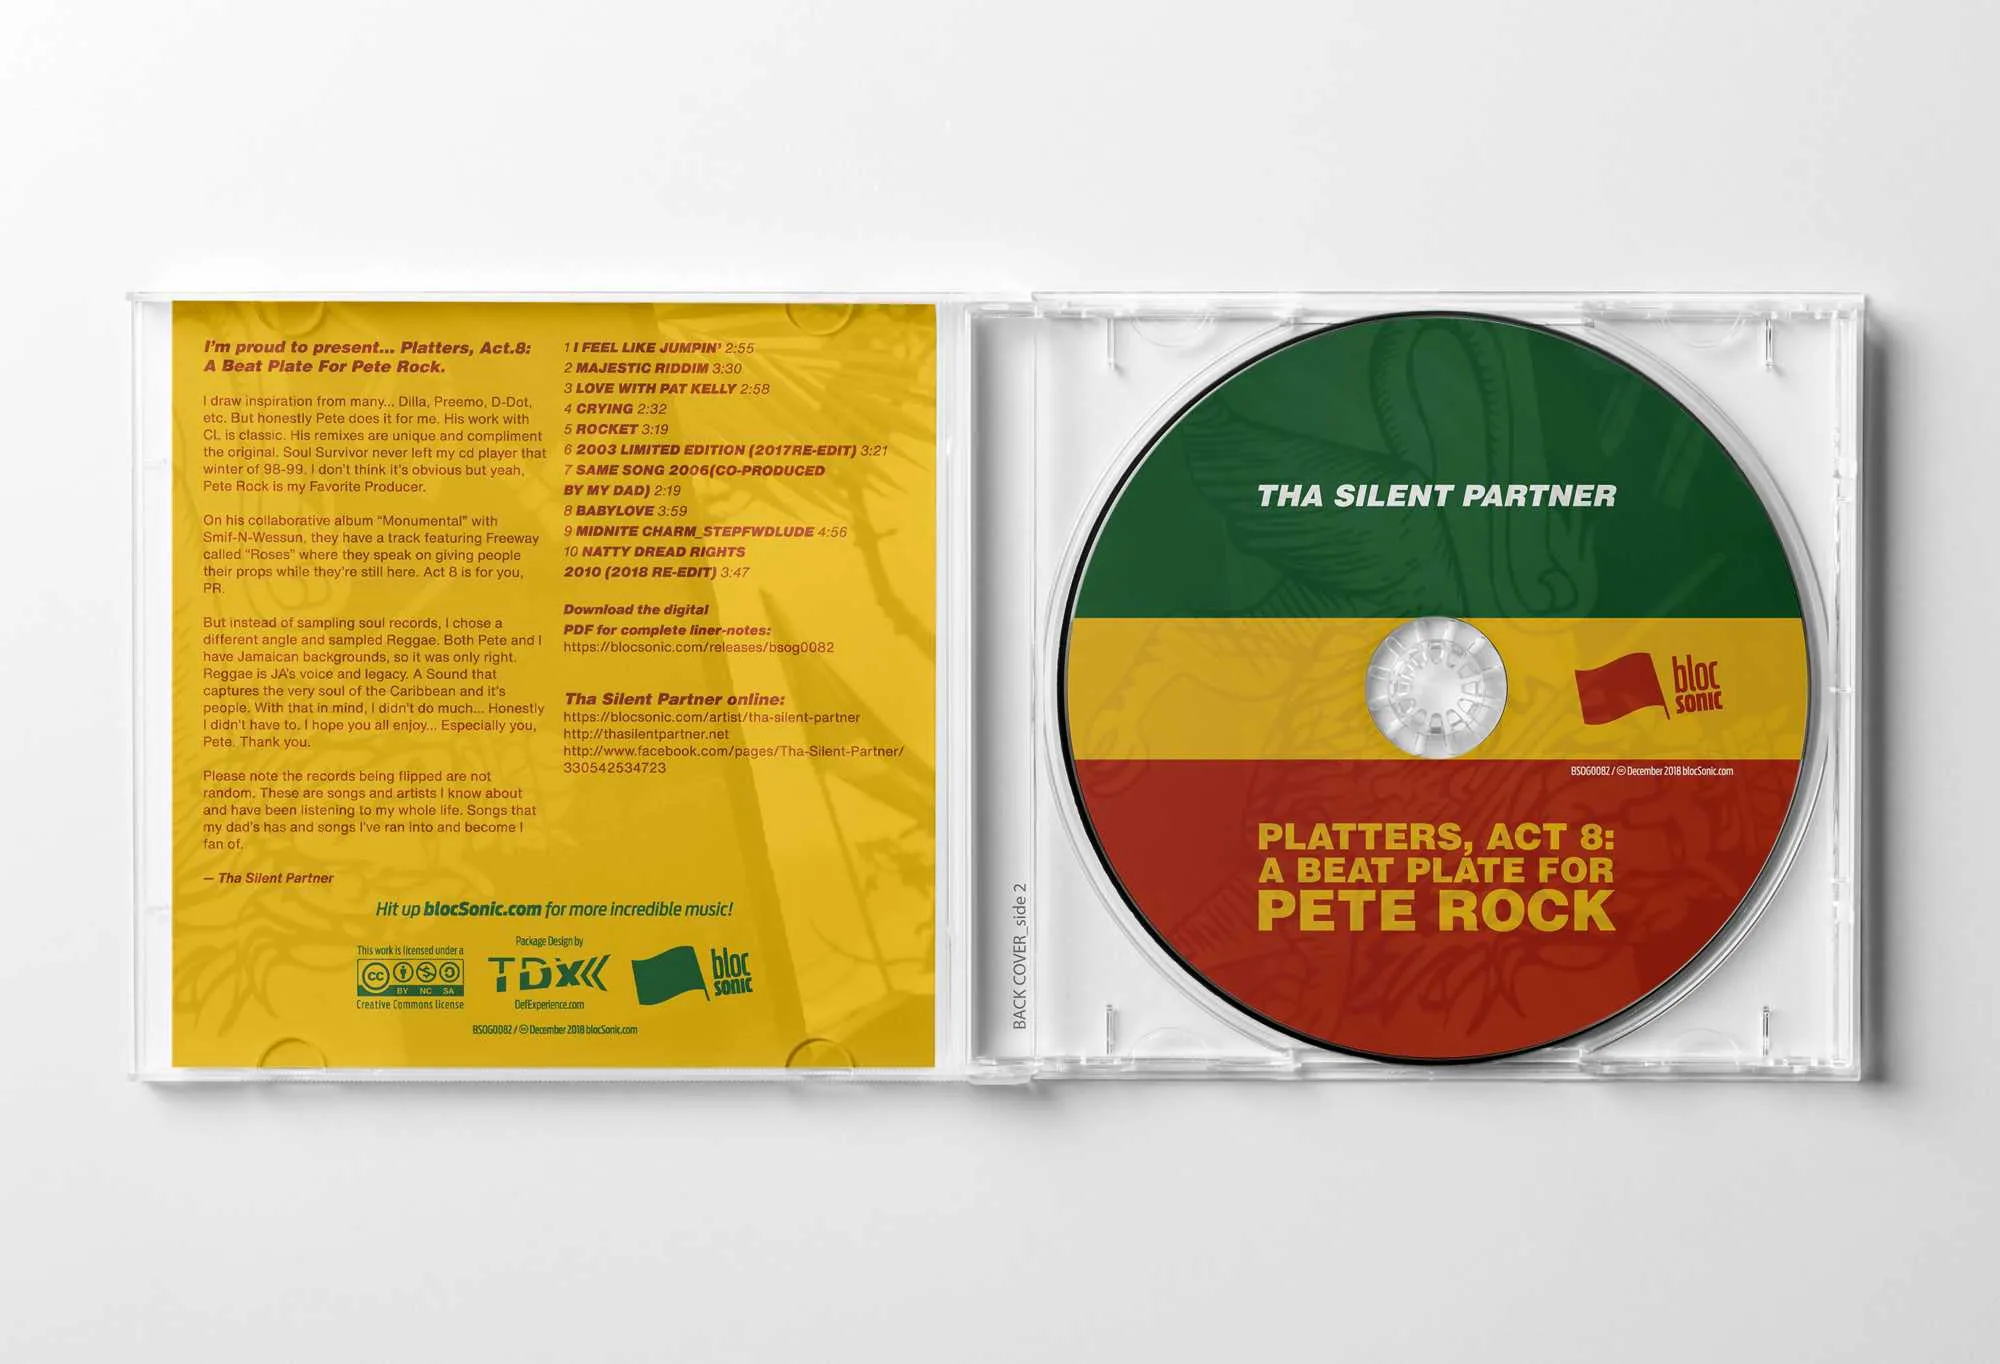 Album promo for “Platters, Act 8: A Beat Plate For Pete Rock” by Tha Silent Partner